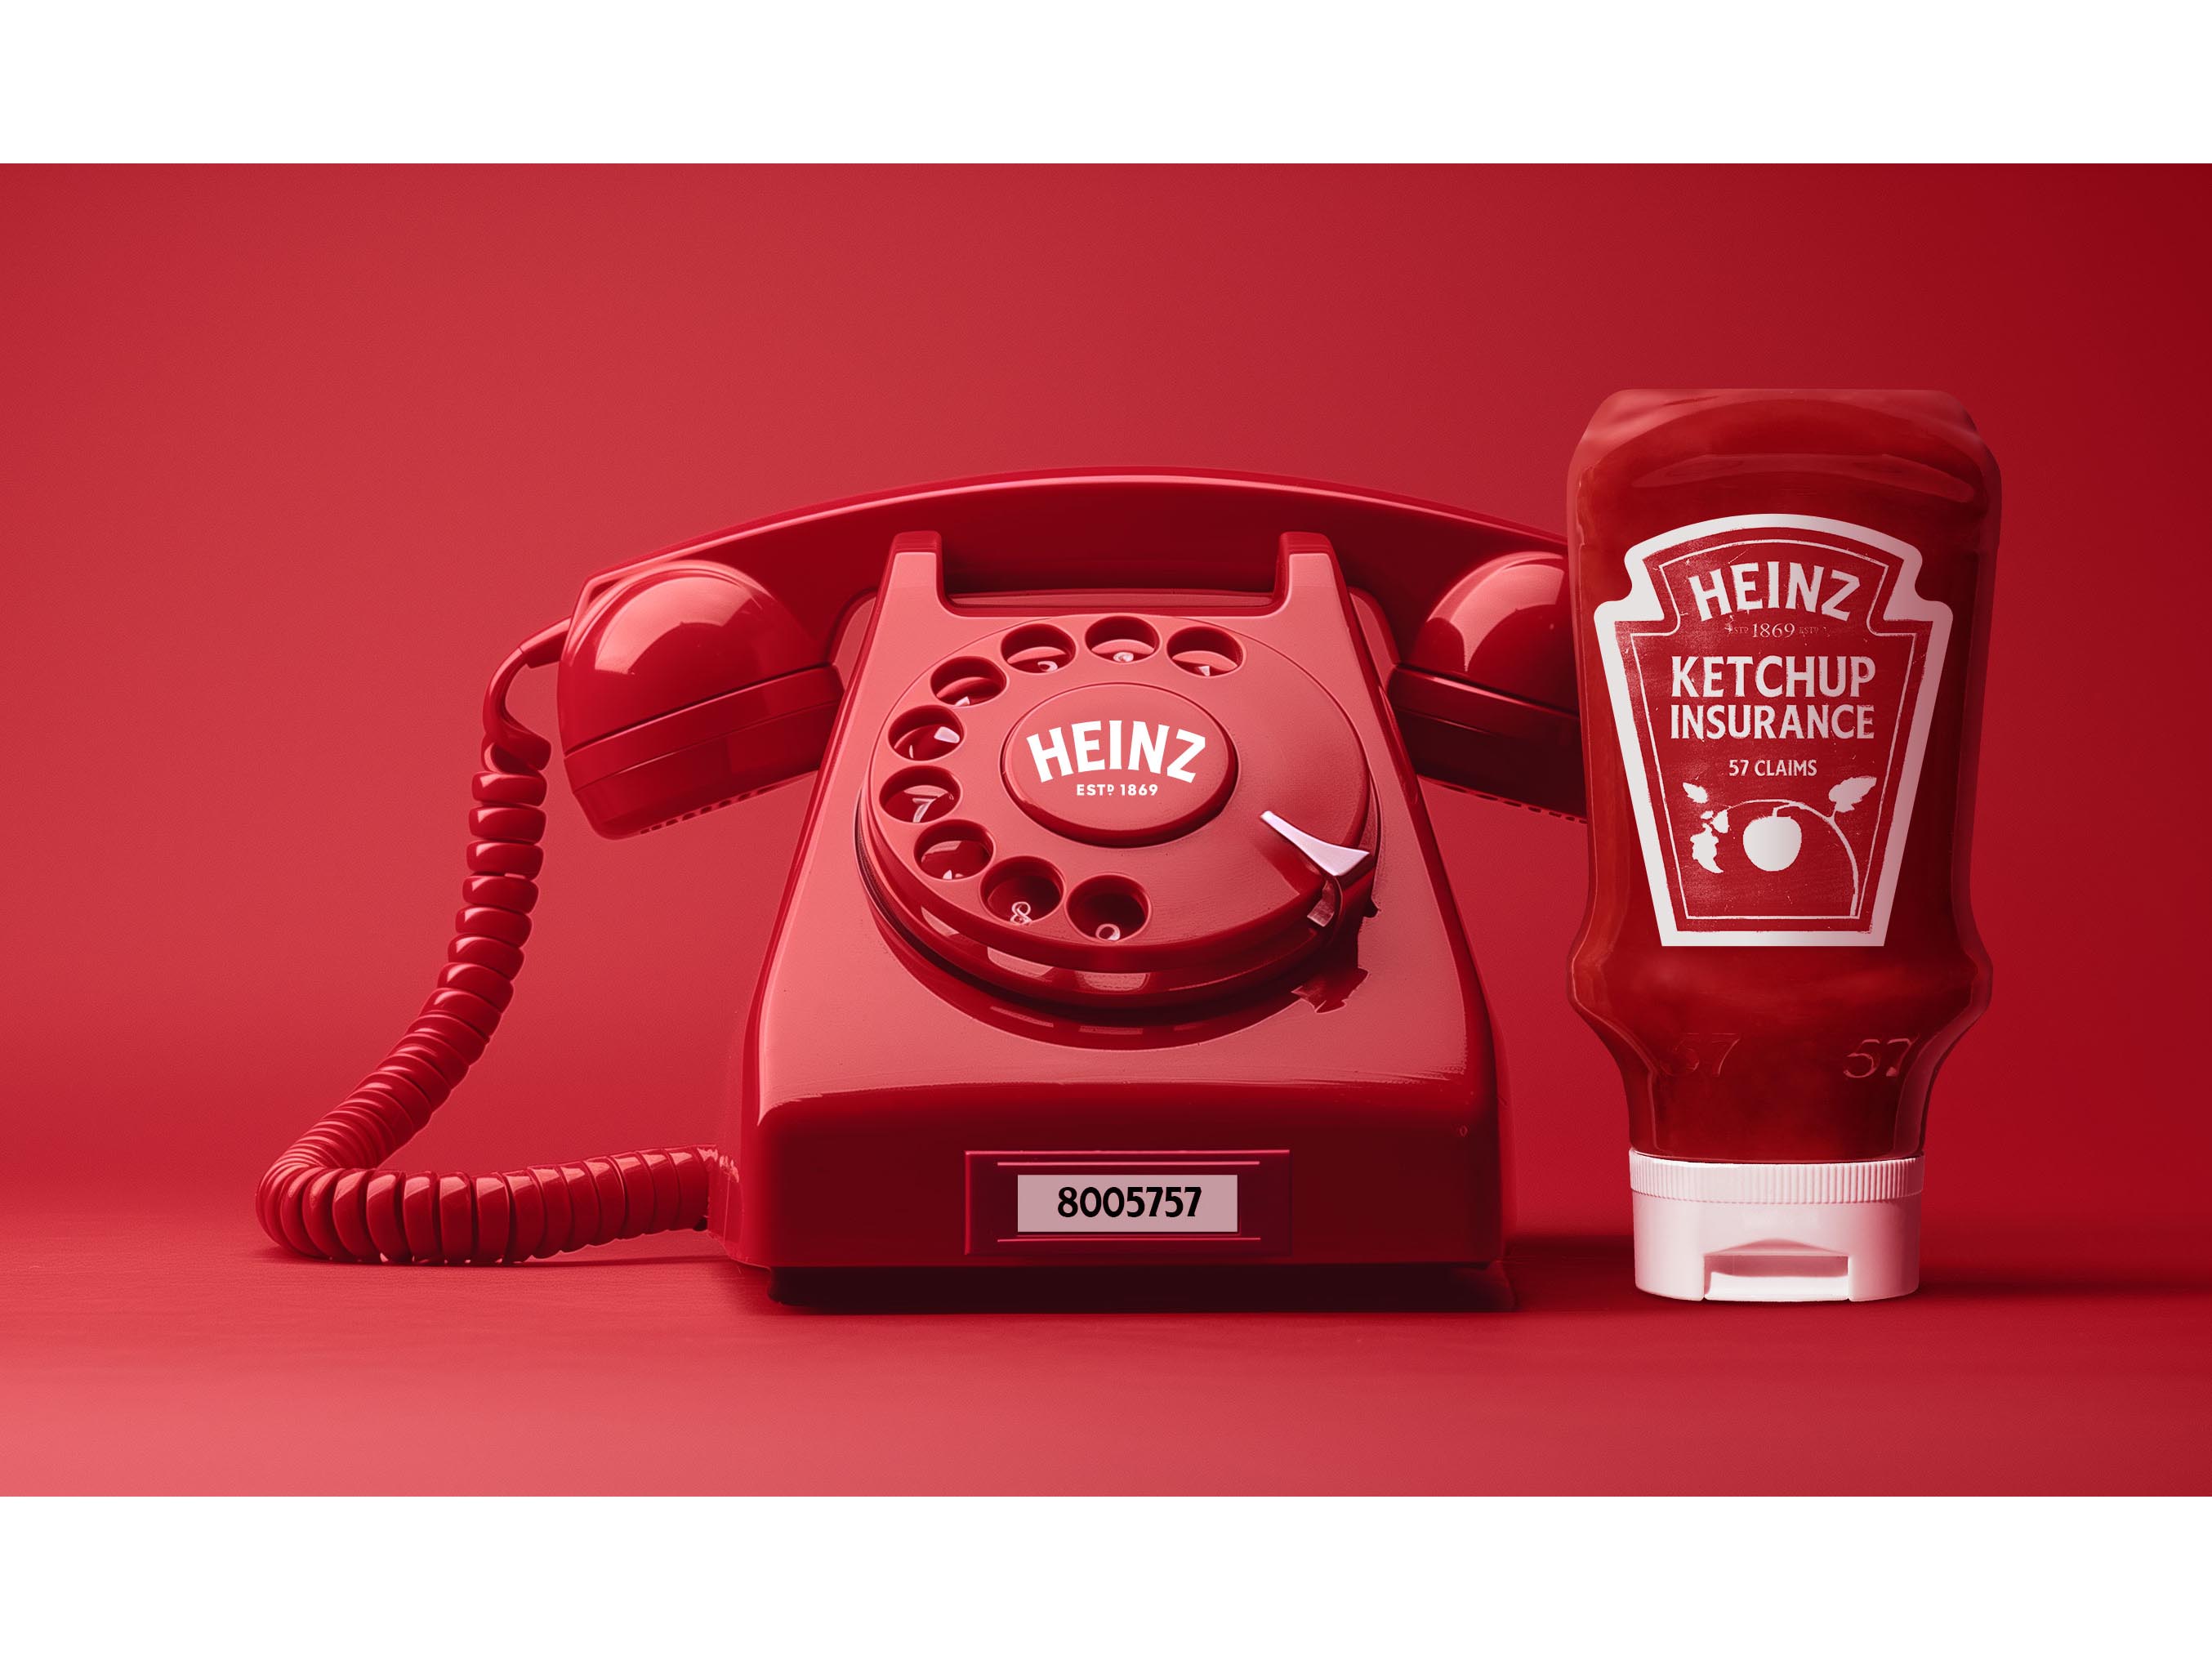 Heinz Arabia introduces first ever ketchup insurance policy